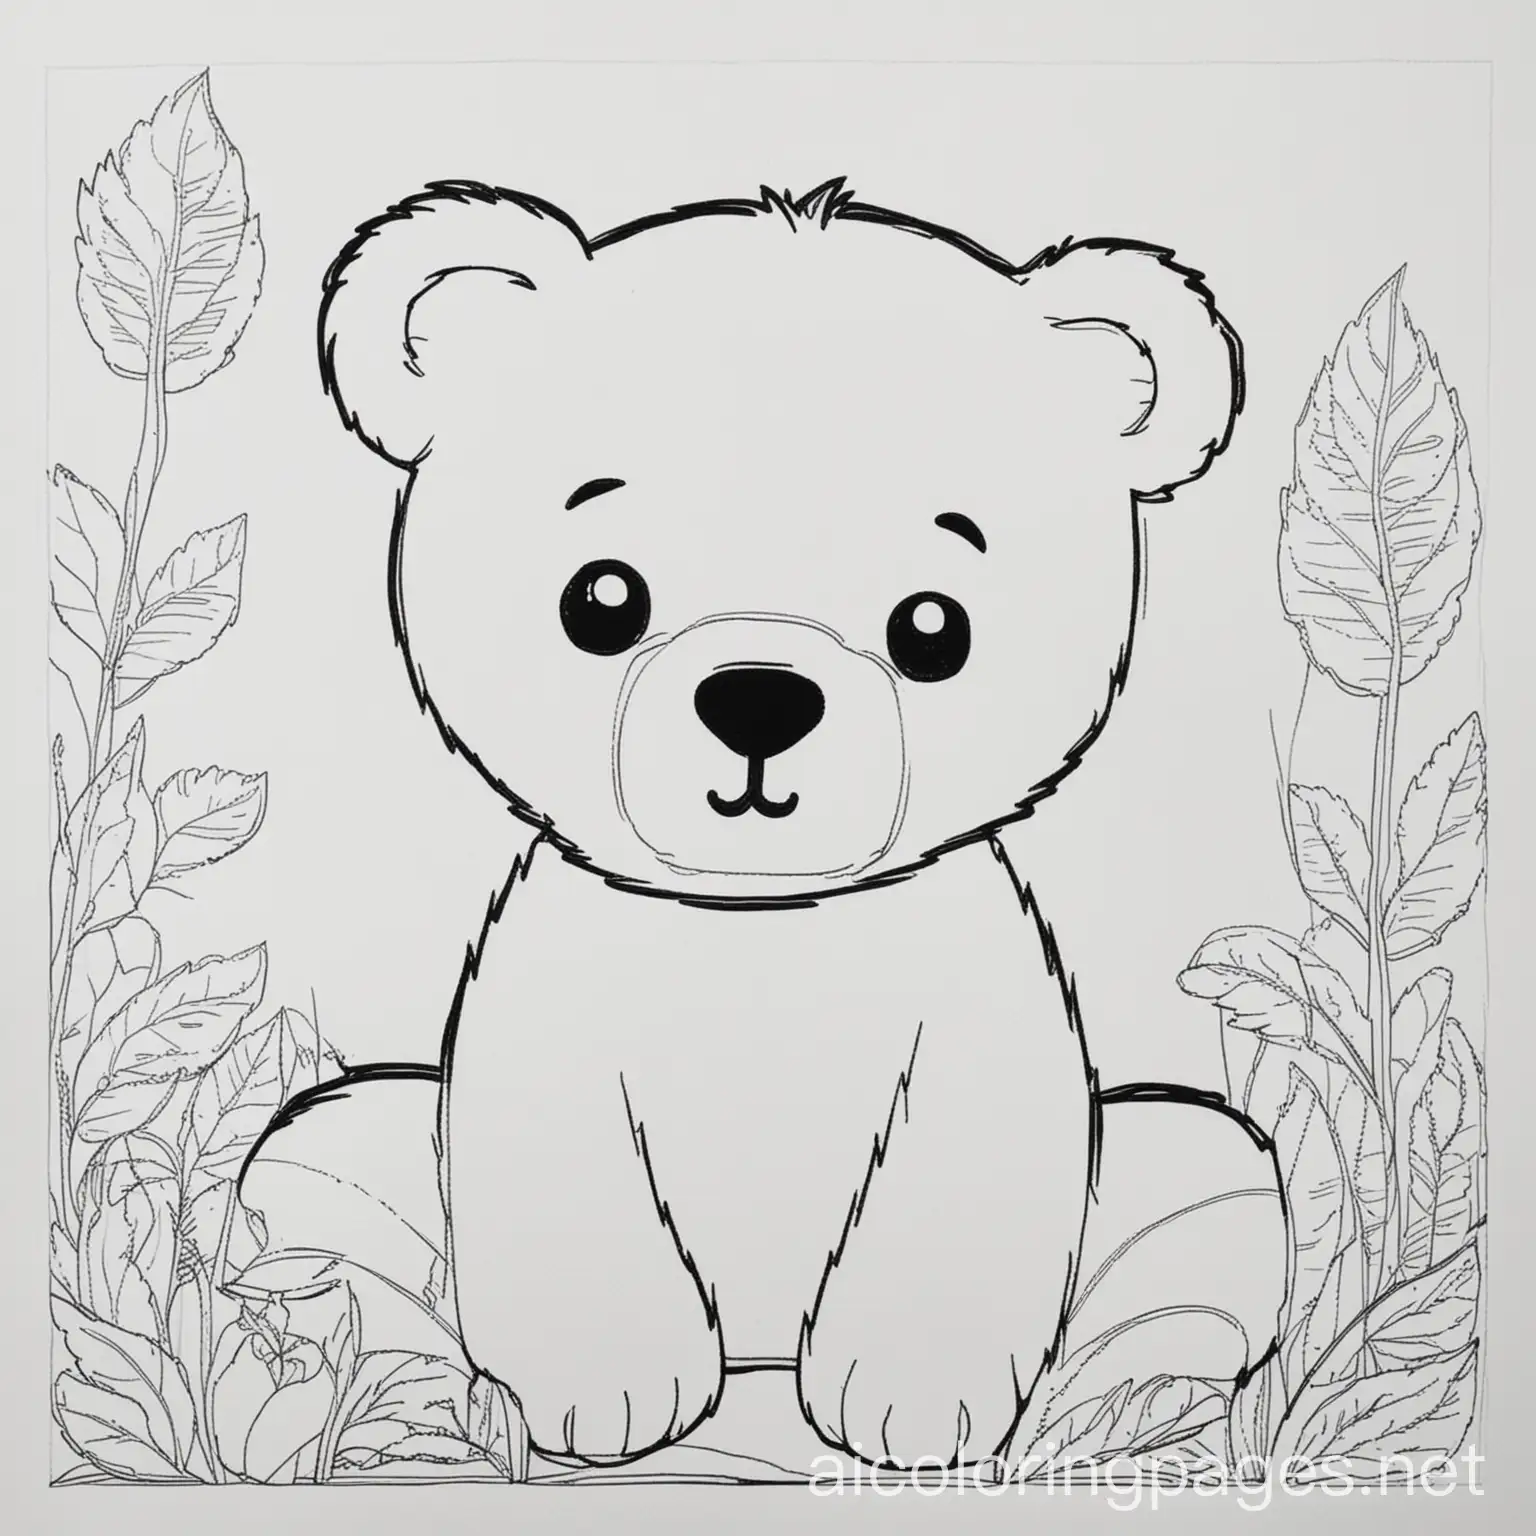 a cute BEAR, Coloring Page, black and white, line art, white background, Simplicity, bold outline, no shading, Ample White Space. The background of the coloring page is plain white to make it easy for young children to color within the lines. The outlines of all the subjects are easy to distinguish, making it simple for kids to color without too much difficulty, Coloring Page, black and white, line art, white background, Simplicity, Ample White Space. The background of the coloring page is plain white to make it easy for young children to color within the lines. The outlines of all the subjects are easy to distinguish, making it simple for kids to color without too much difficulty, Coloring Page, black and white, line art, white background, Simplicity, Ample White Space. The background of the coloring page is plain white to make it easy for young children to color within the lines. The outlines of all the subjects are easy to distinguish, making it simple for kids to color without too much difficulty